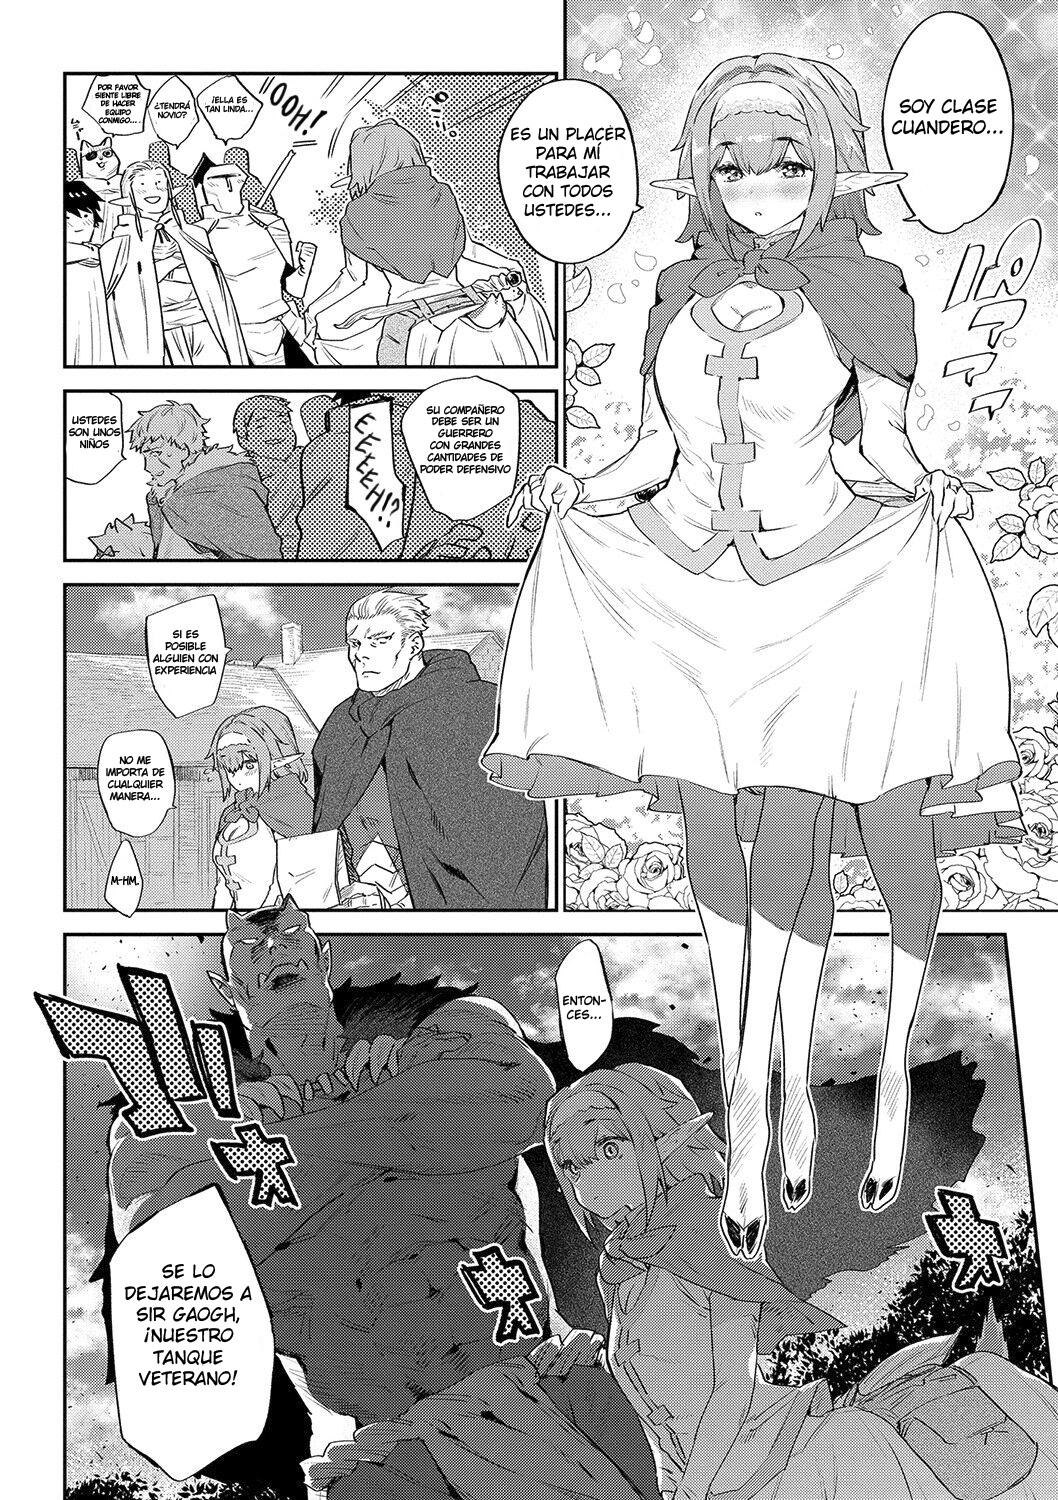 Manga Ihou no Otome-Monster Girls in Another World Chapter 1 image number 31